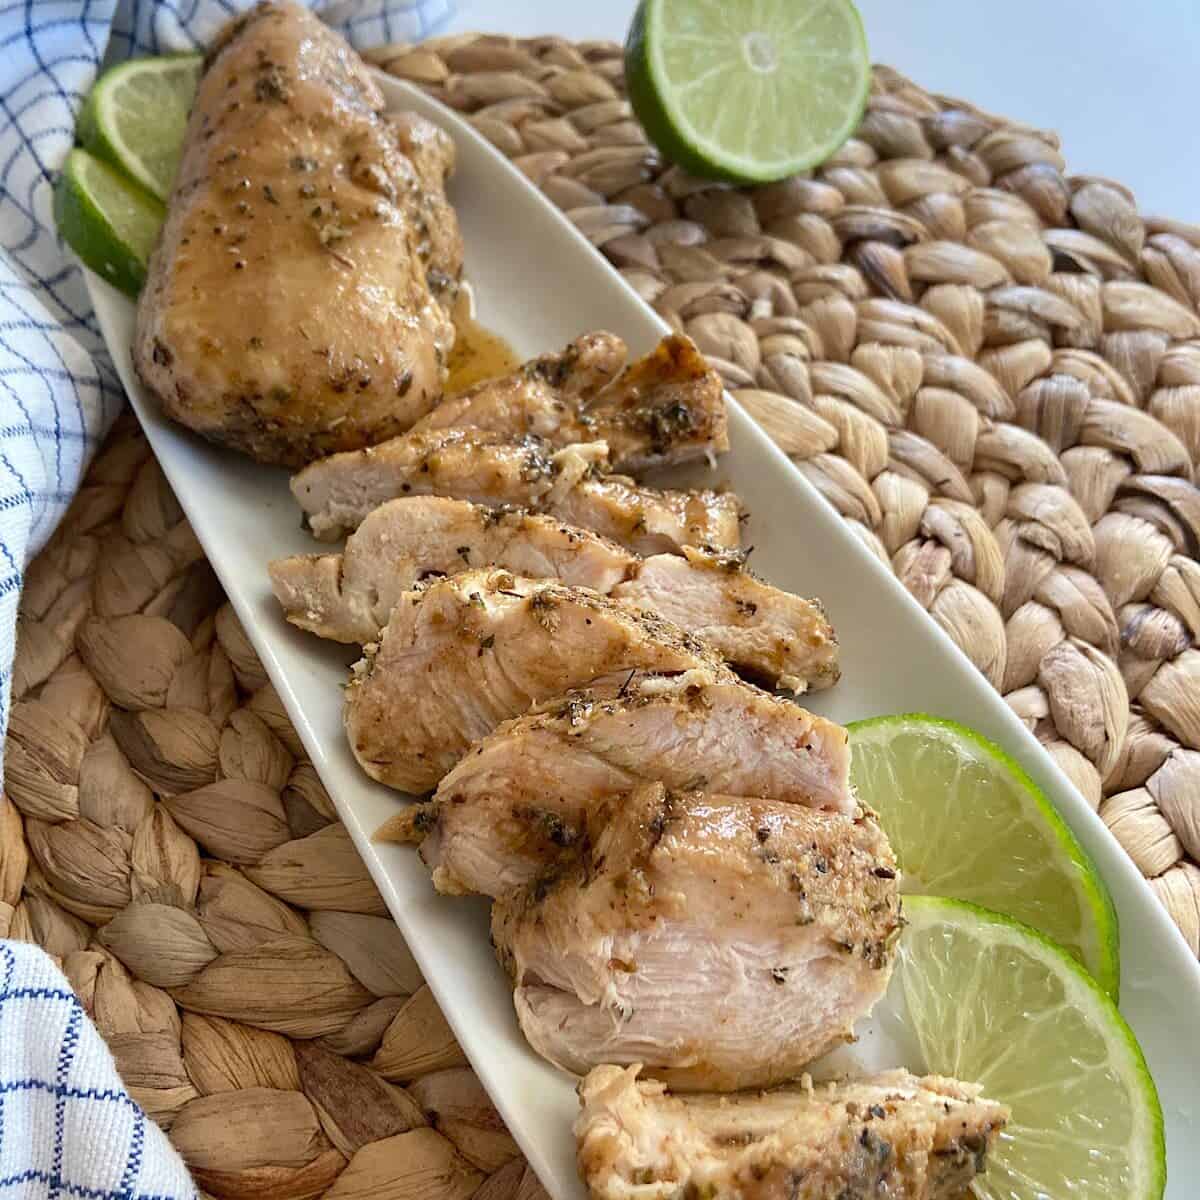 Spice baked chicken on a serving dish.